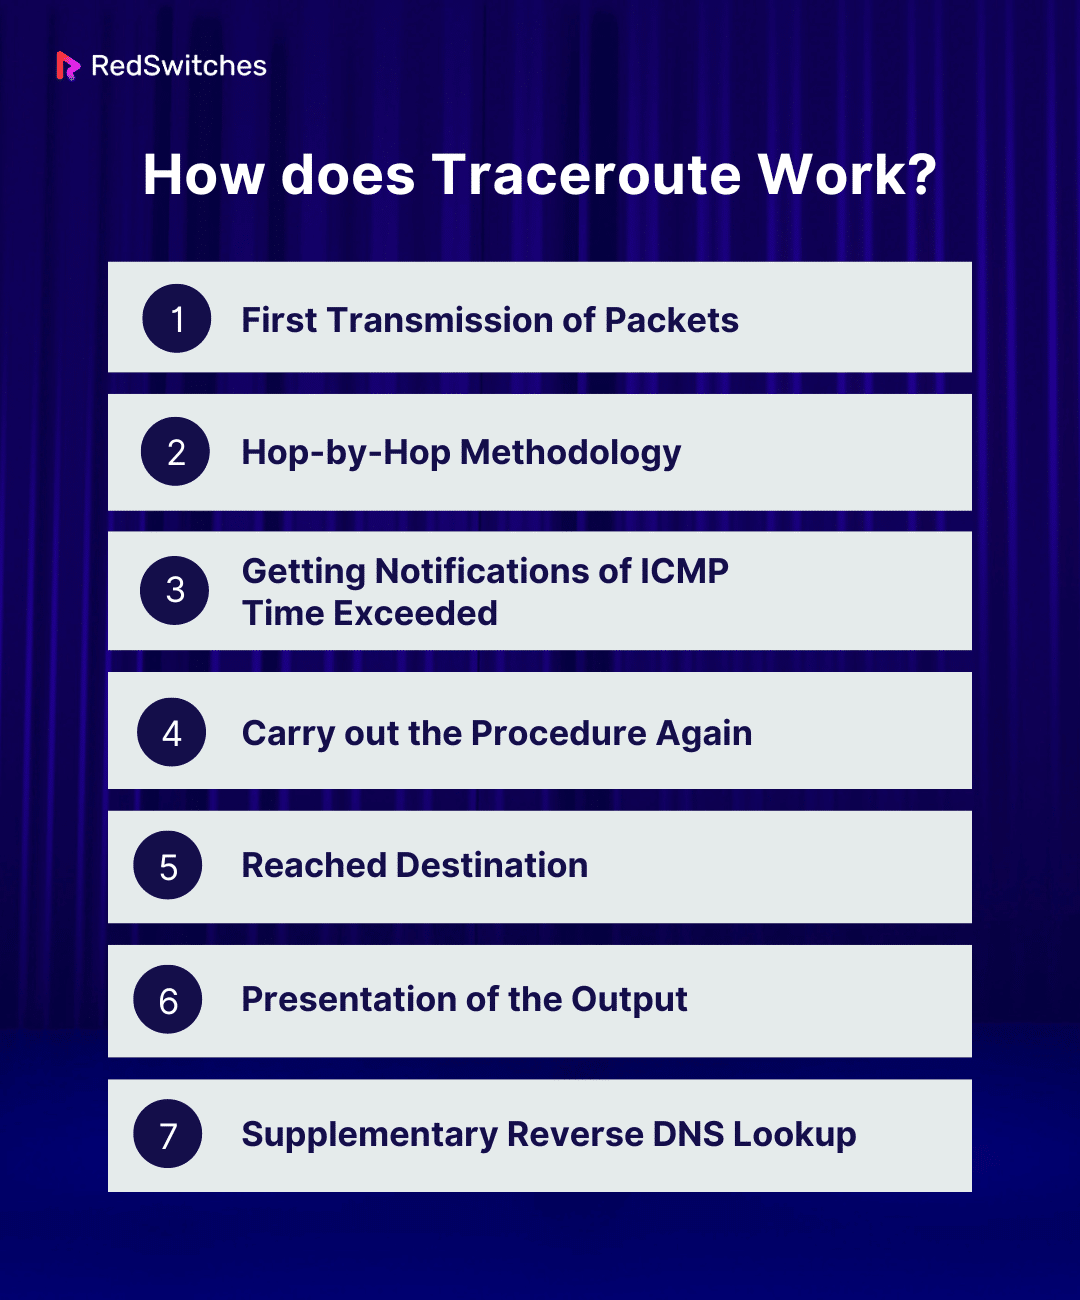 How Does Traceroute Work?